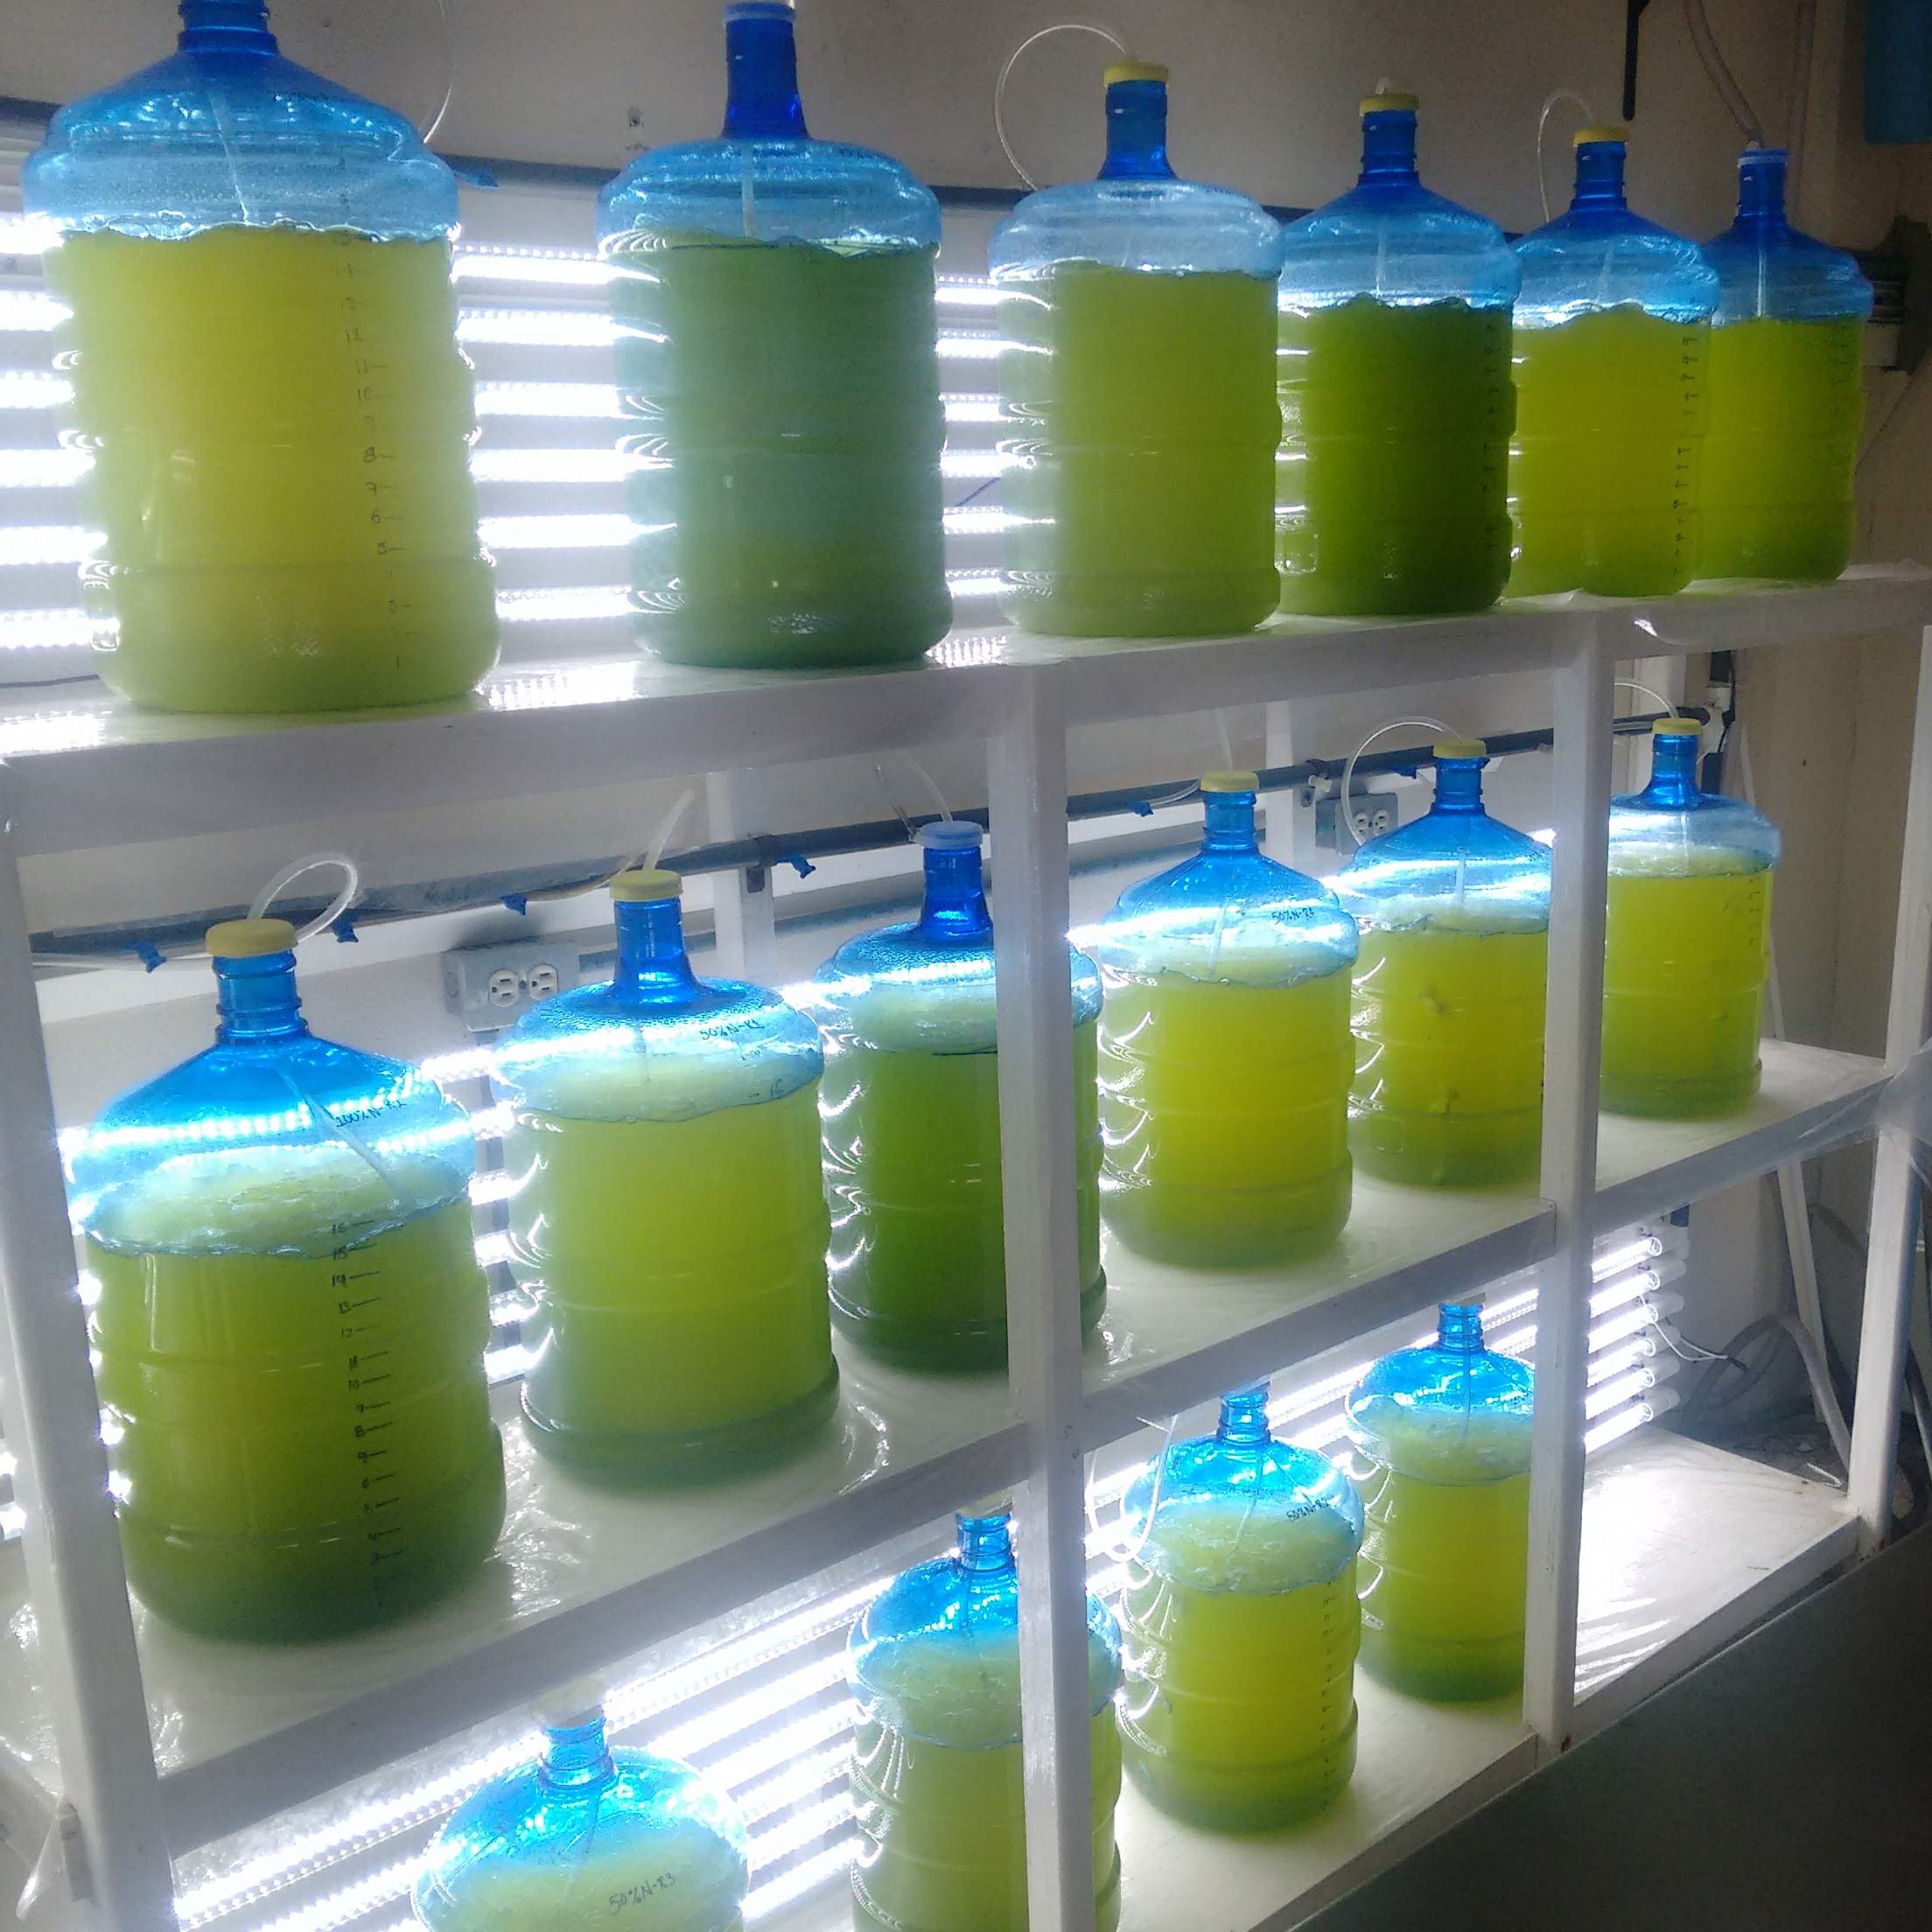 Algal Containers in lab